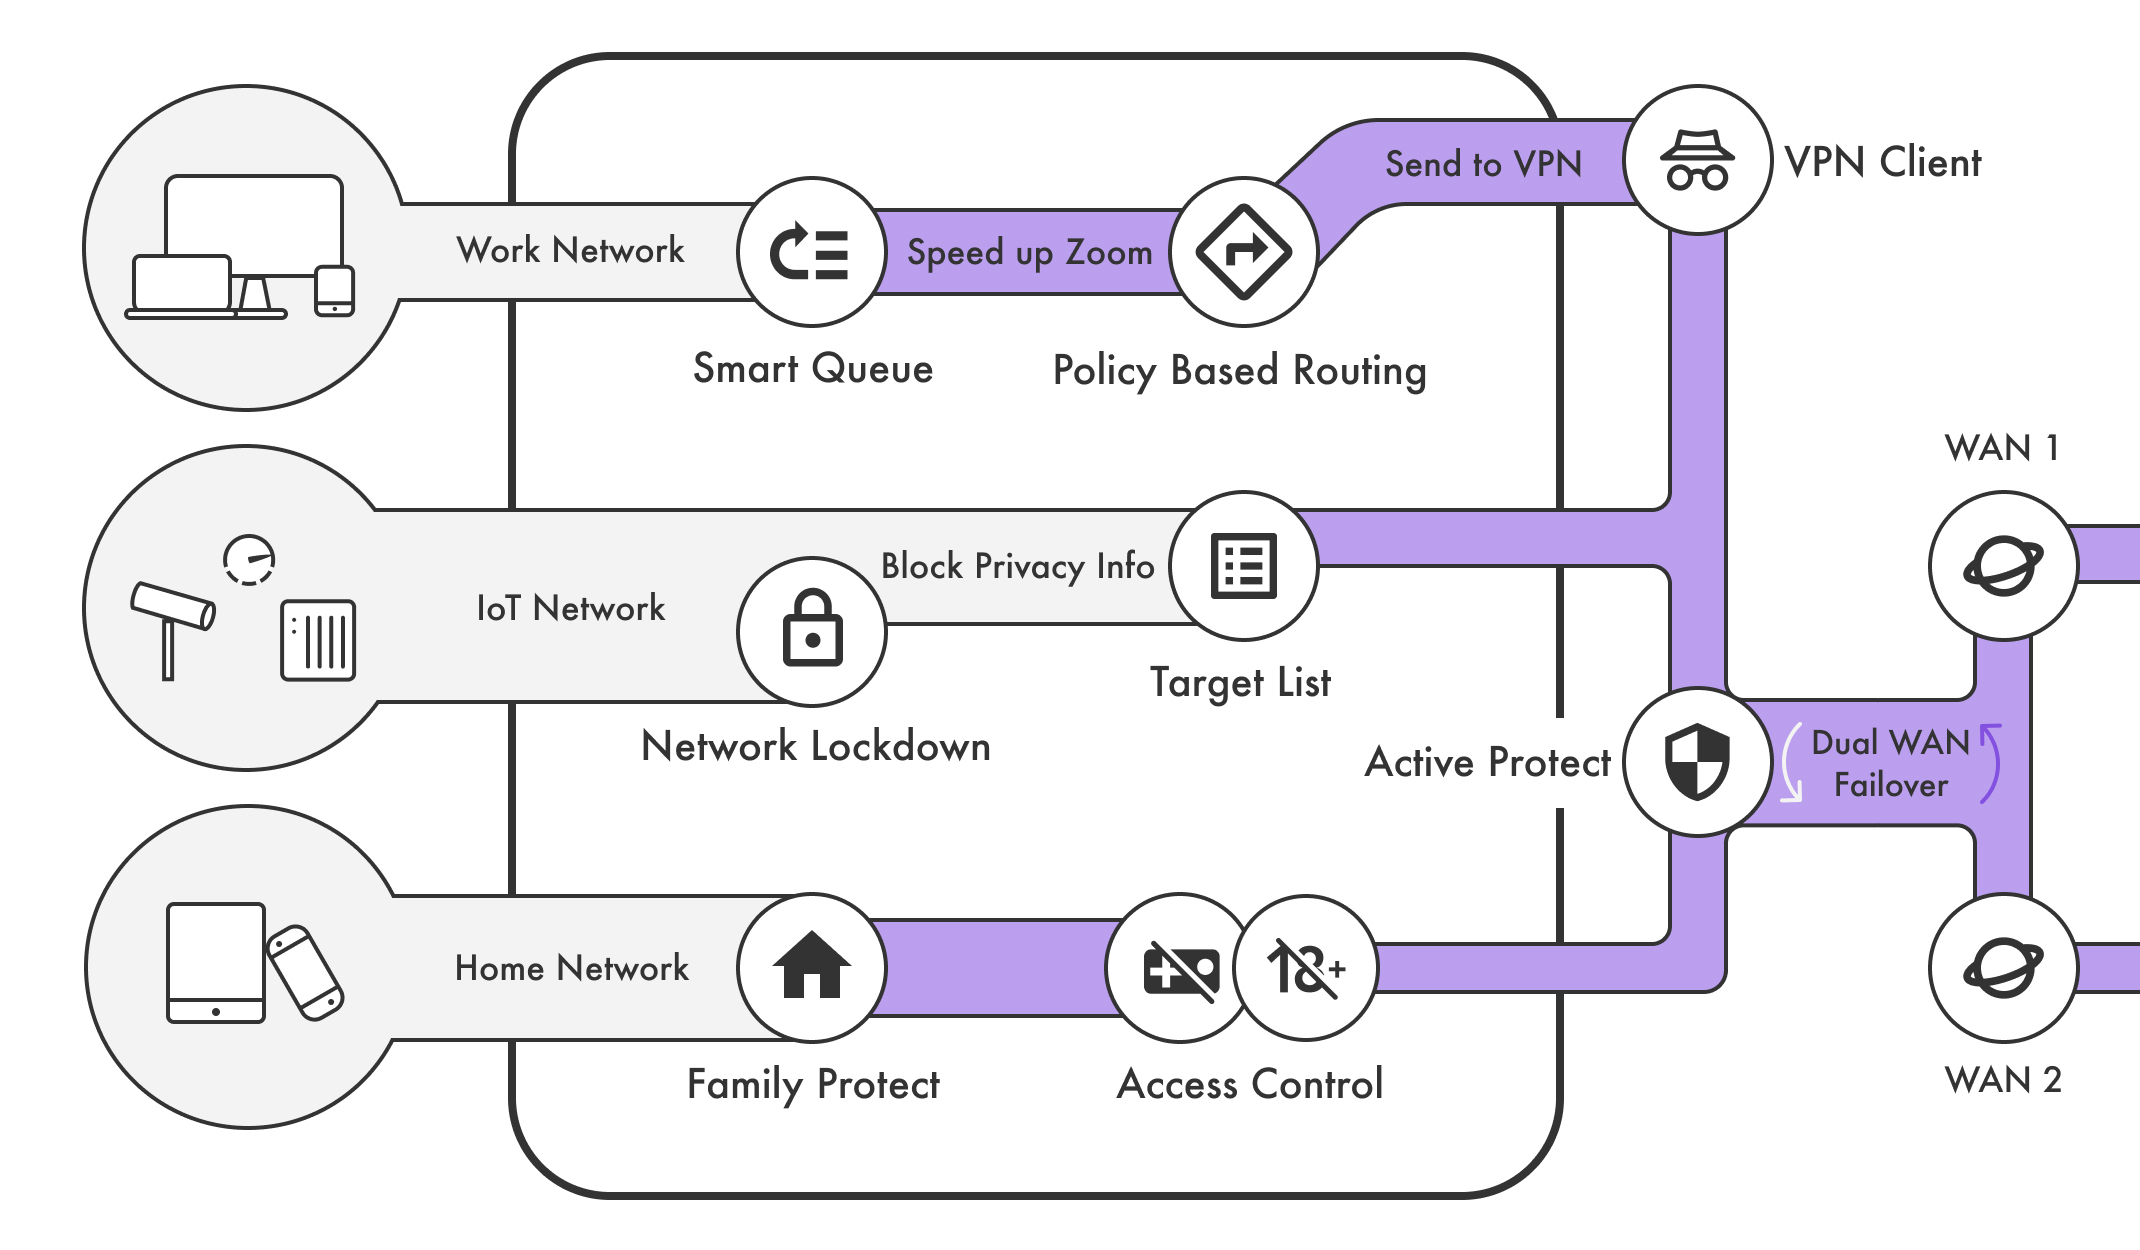 Diagram of Work Network, IoT Network and Home Network